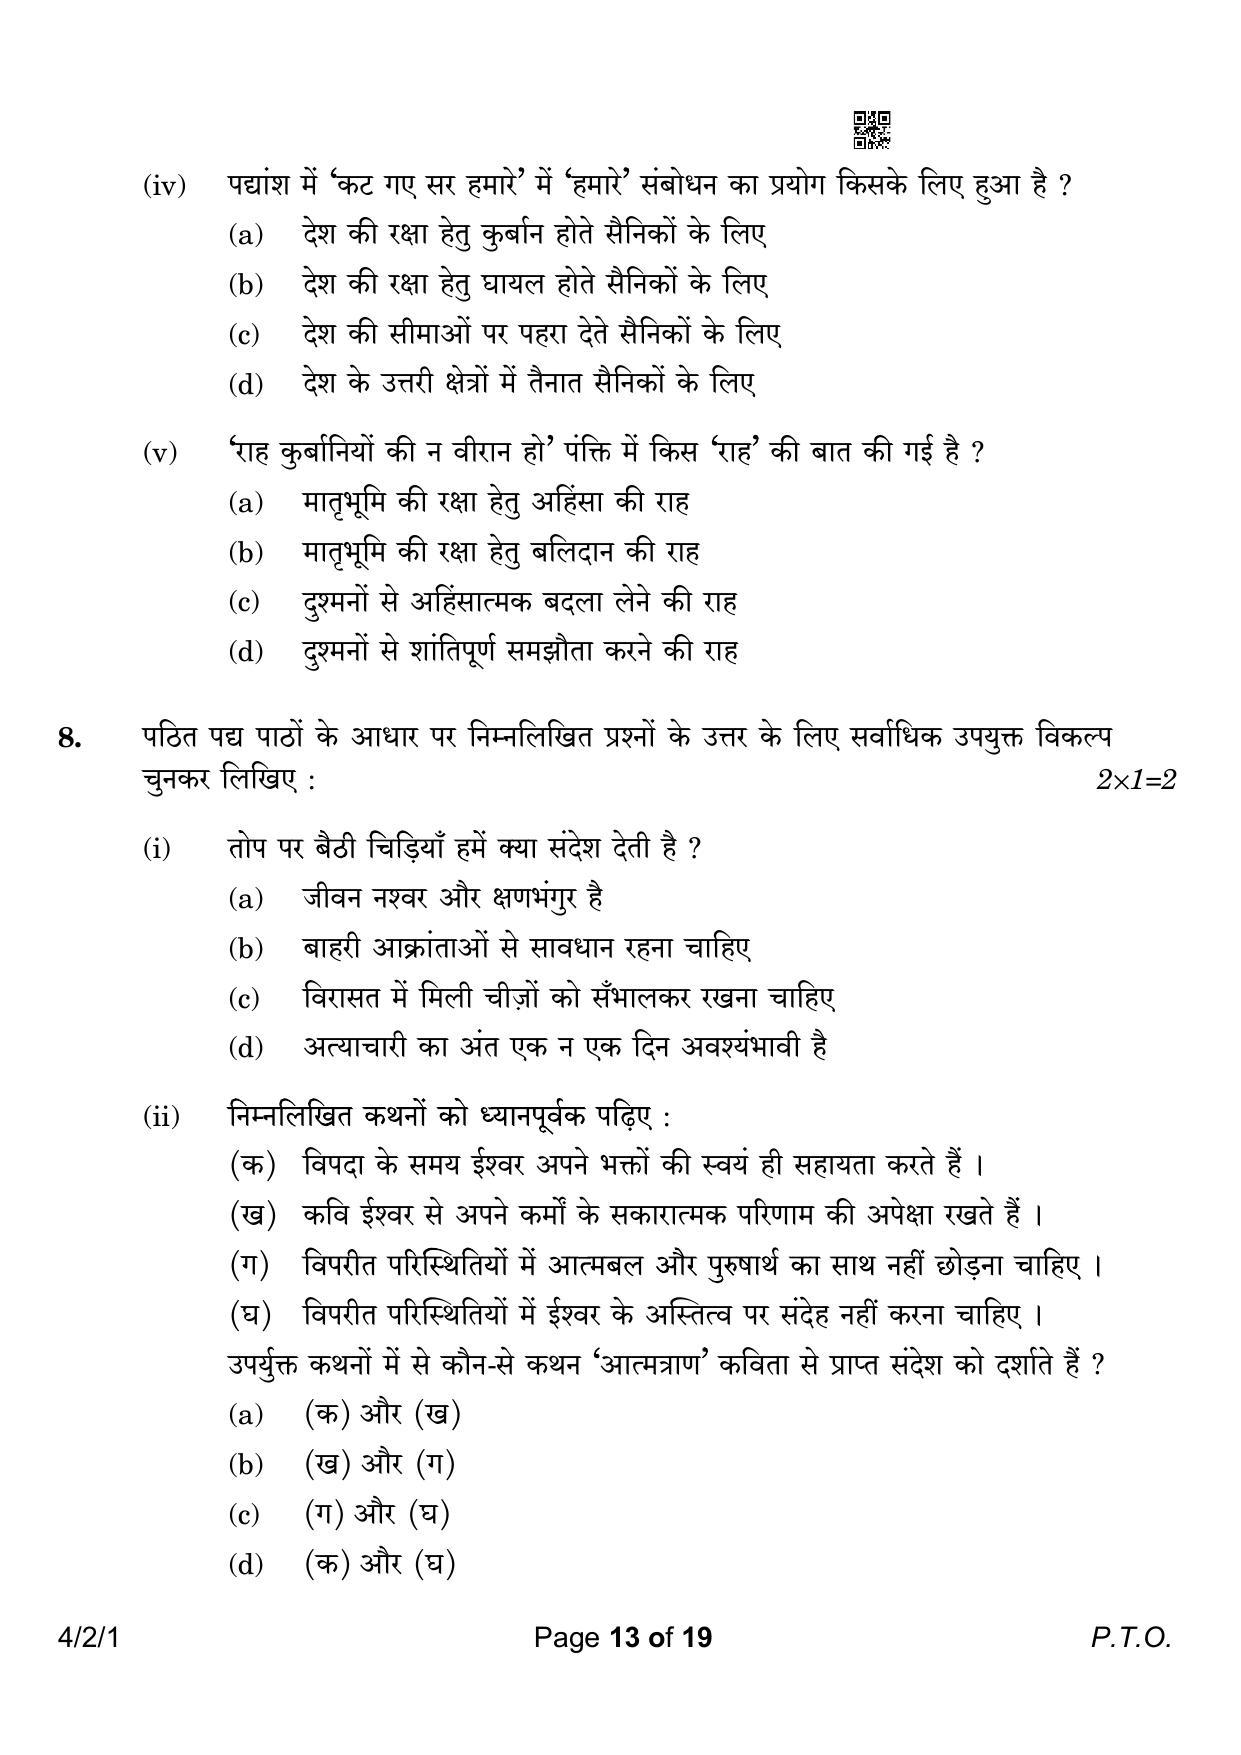 CBSE Class 10 4-2-1 Hindi B 2023 Question Paper - Page 13